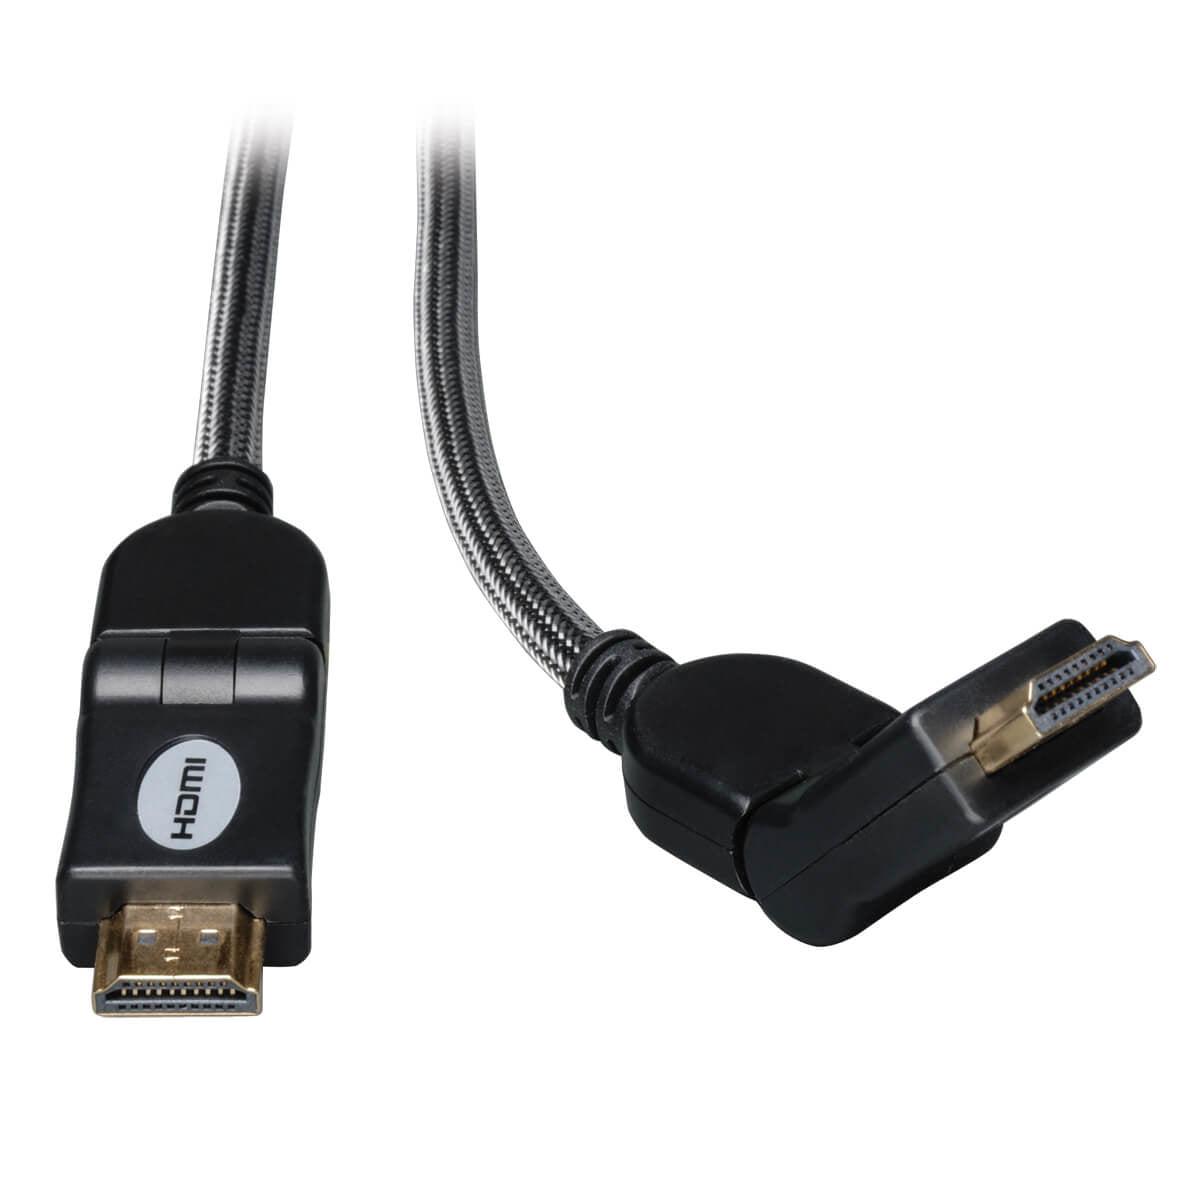 Tripp Lite P568-003-Sw High-Speed Hdmi Cable With Swivel Connectors, Digital Video With Audio, Uhd 4K (M/M), 3 Ft. (0.91 M)